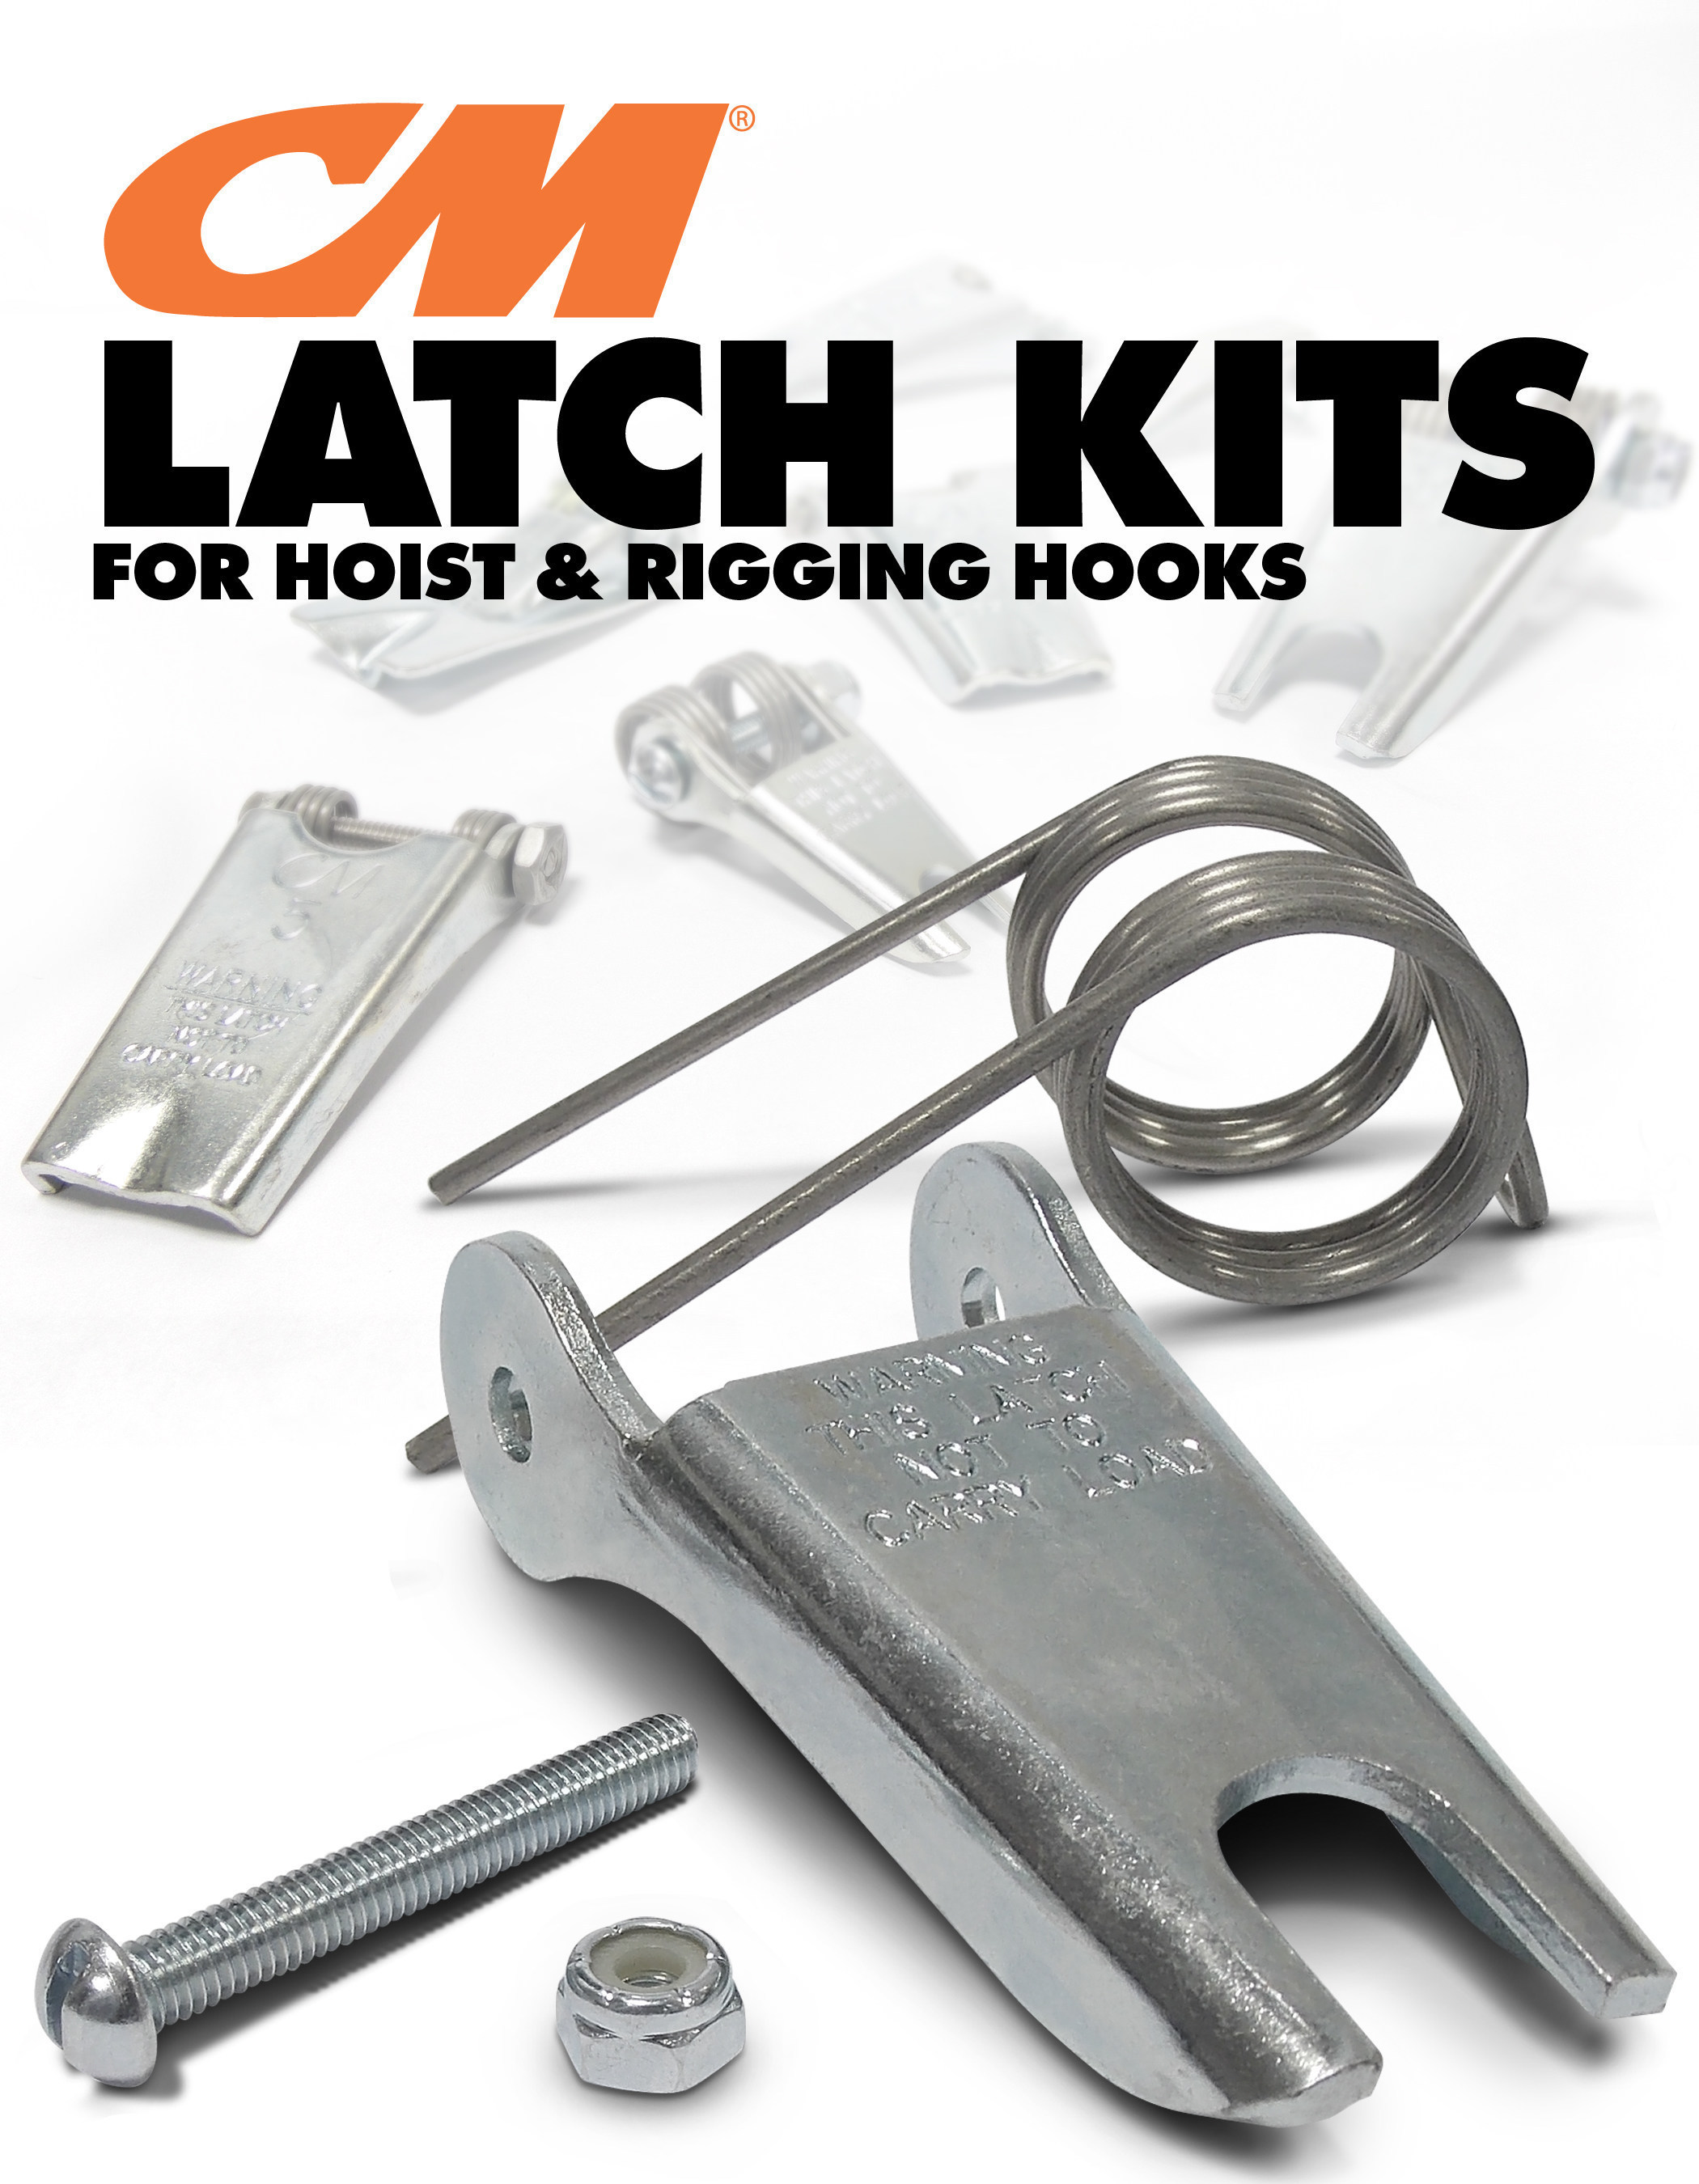 Columbus McKinnon is now offering 35 of its most popular latch kits for hoist and rigging hooks in economical, easy-to-order bulk packaging. Hoist Latch Kits and Rigging Latch Kits will be available in bulk packages of 50 and 100 units and will feature smart part numbers, making them easy to order. Bulk latch kits are available through the Columbus McKinnon network of distributors.